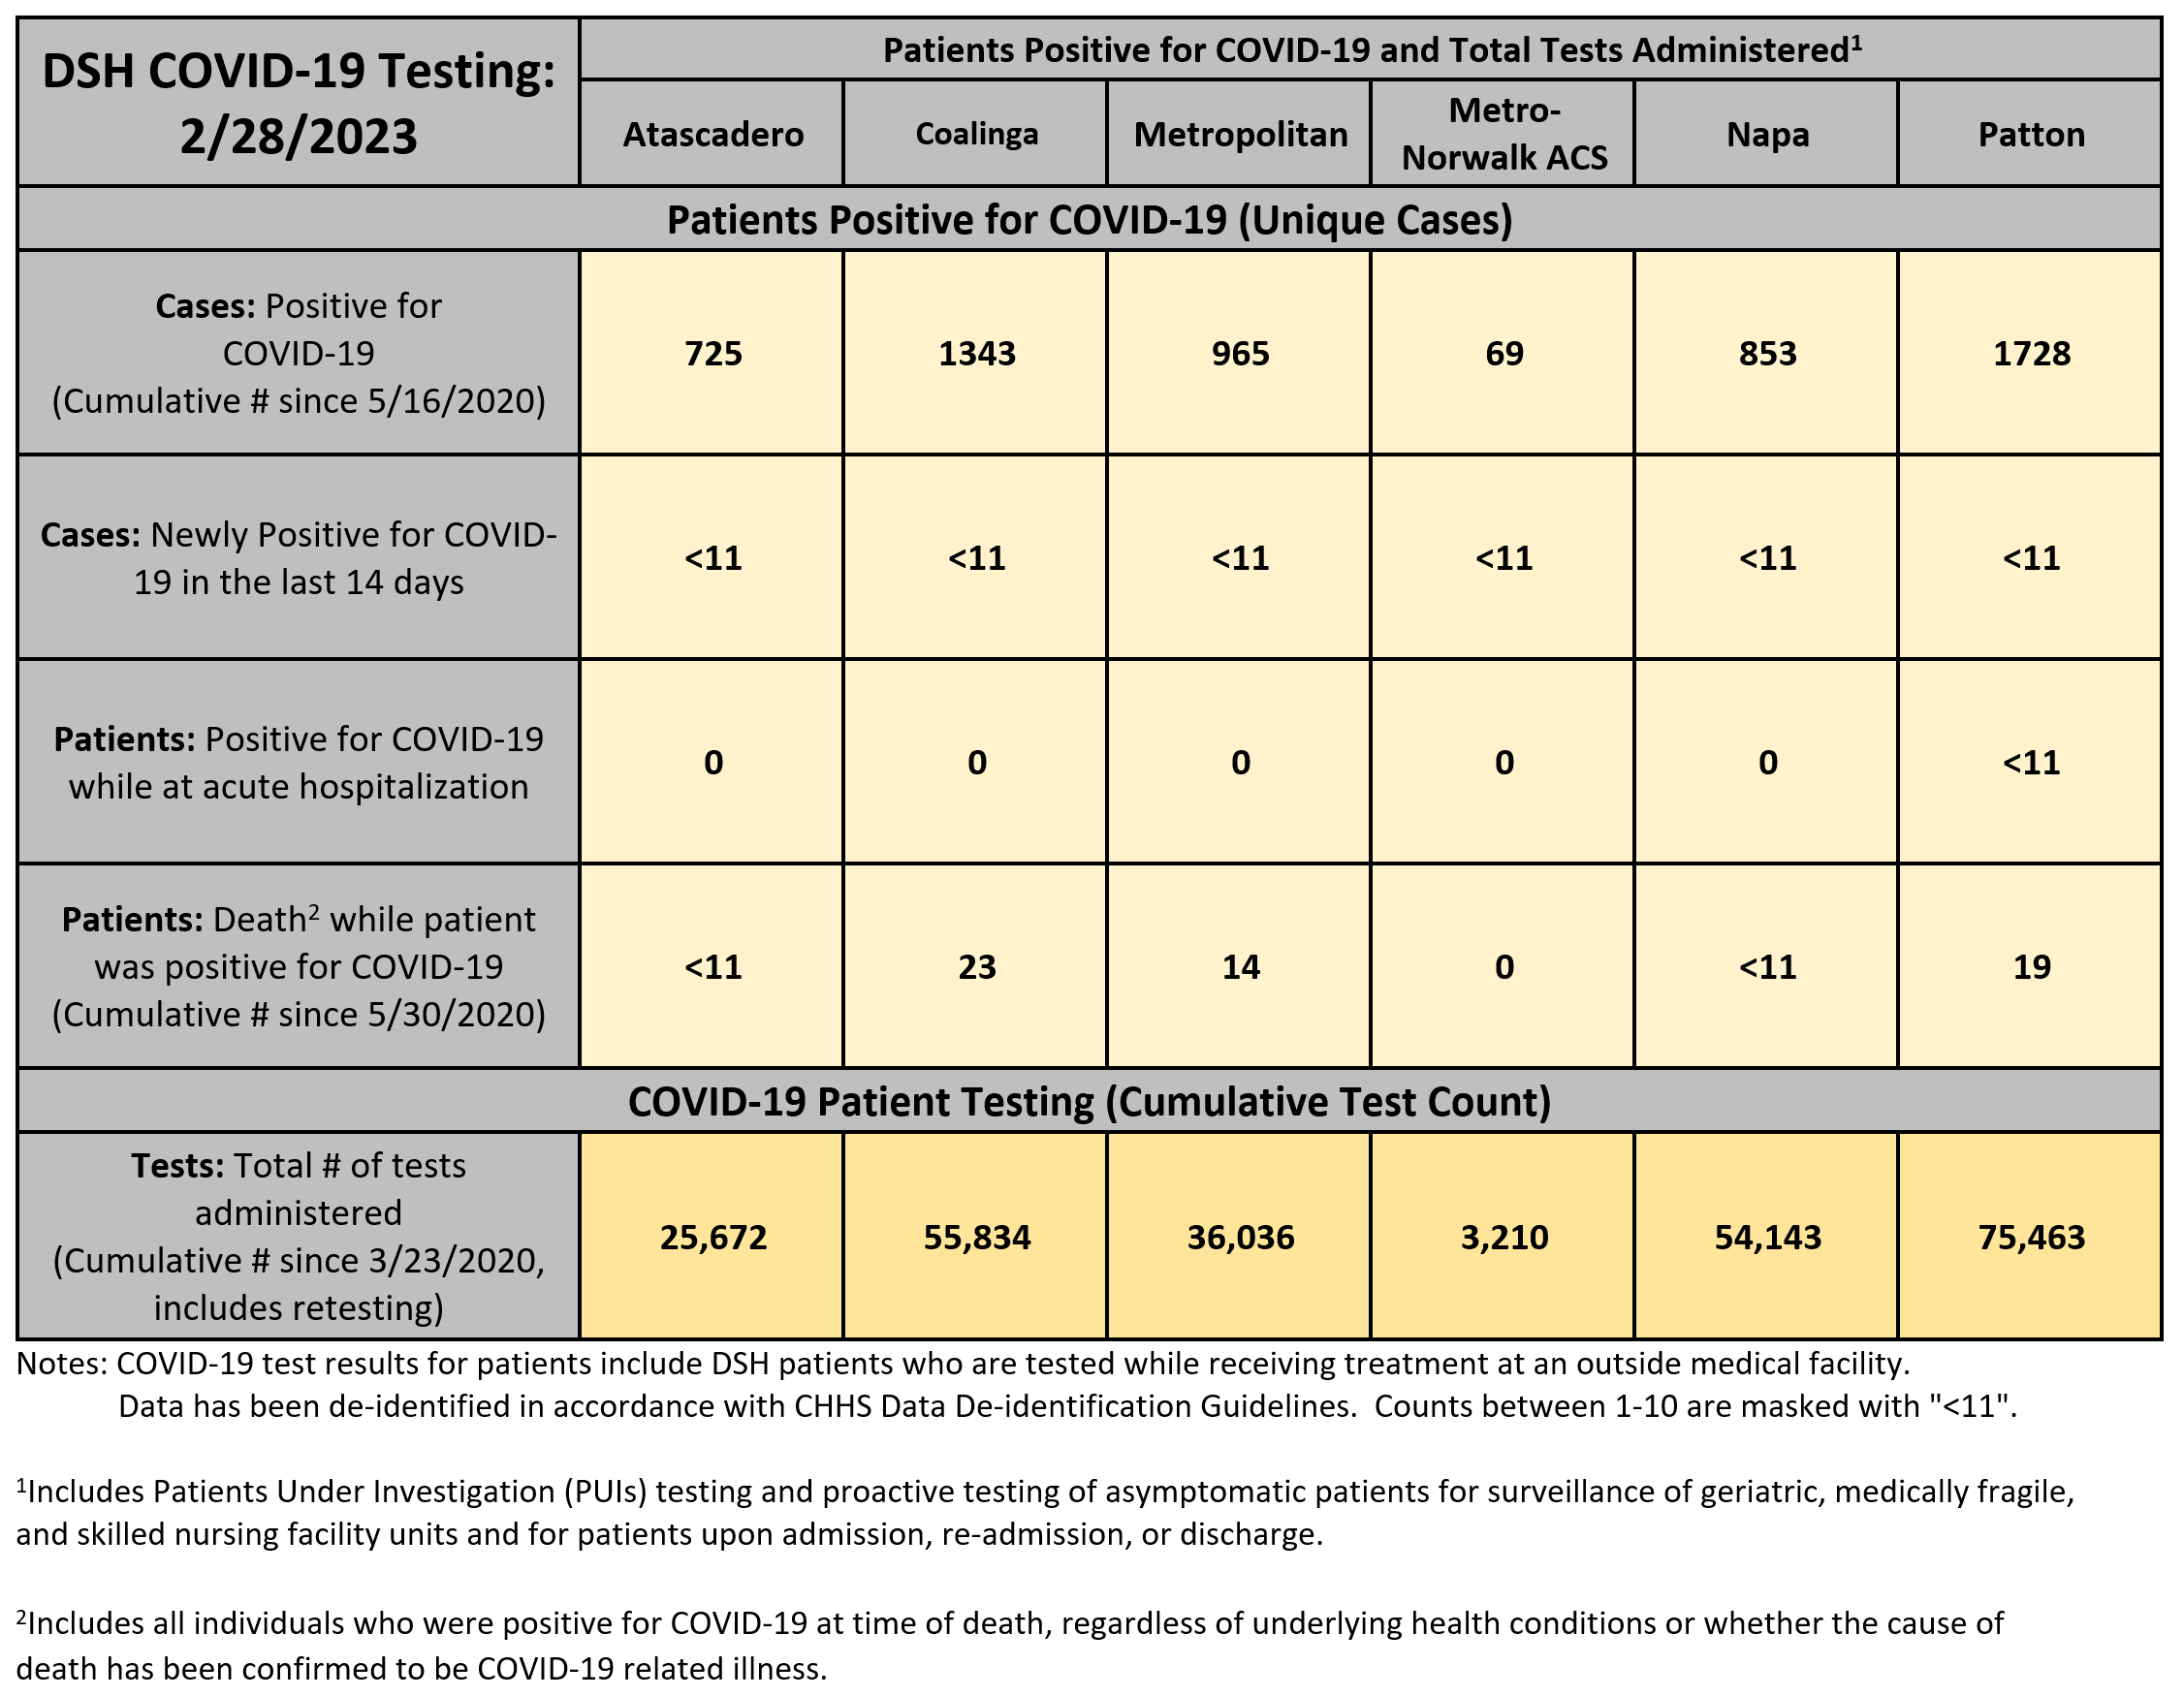 DSH COVID-19 Testing: As of 7/1/2022, Patients Positive for COVID-19 and Total Tests Administered, Cases: Positive for COVID-19 (Cumulative Number since 5/16/2020) - Atascadero: 475, Coalinga: 1026, Metropolitan: 657, Metro-Norwalk ACS: 32, Napa: 609, Patton: 1125 – Next Row: Cases: Newly Positive for COVID-19 in the last 14 days – Atascadero: 37, Coalinga: 31, Metropolitan: Less than 11, Metro-Norwalk ACS: Less than 11, Napa: Less than 11, Patton: 11 – Next Row: Patients: Positive for COVID-19 while at acute hospitalization – Atascadero: 0, Coalinga: 0, Metropolitan: 0, Metro-Norwalk ACS: 0, Napa: 0, Patton: Less than 11 – Next Row: Patients: Death² while patient was positive for COVID-19 (Cumulative Number since 5/30/2020) – Atascadero: Less Than 11, Coalinga: 23, Metropolitan: 14, Metro-Norwalk ACS: 0, Napa: Less Than 11, Patton: 19, next section - COVID-19 Testing (Cumulative Test Count), Tests: Total Number of tests administered(Cumulative Number since 3/23/2020, includes retesting) - Atascadero: 18,922, Coalinga: 39,533, Metropolitan: 26,009, Metro-Norwalk ACS: 2,378, Napa: 42,175, Patton: 51,989. subnotes: COVID-19 test results for patients include DSH patients who are tested while receiving treatment at an outside medical facility. Data has been de-identified in accordance with CHHS Data De-identification Guidelines. Counts between 1-10 are masked with Less than 11.   Includes Patients Under Investigation (PUIs) testing and proactive testing of asymptomatic patients for surveillance of geriatric, medically fragile, and skilled nursing facility units and for patients upon admission, re-admission, or discharge. Includes all individuals who were positive for COVID-19 at time of death, regardless of underlying health conditions or whether the cause of death has been confirmed to be COVID-19 related illness.